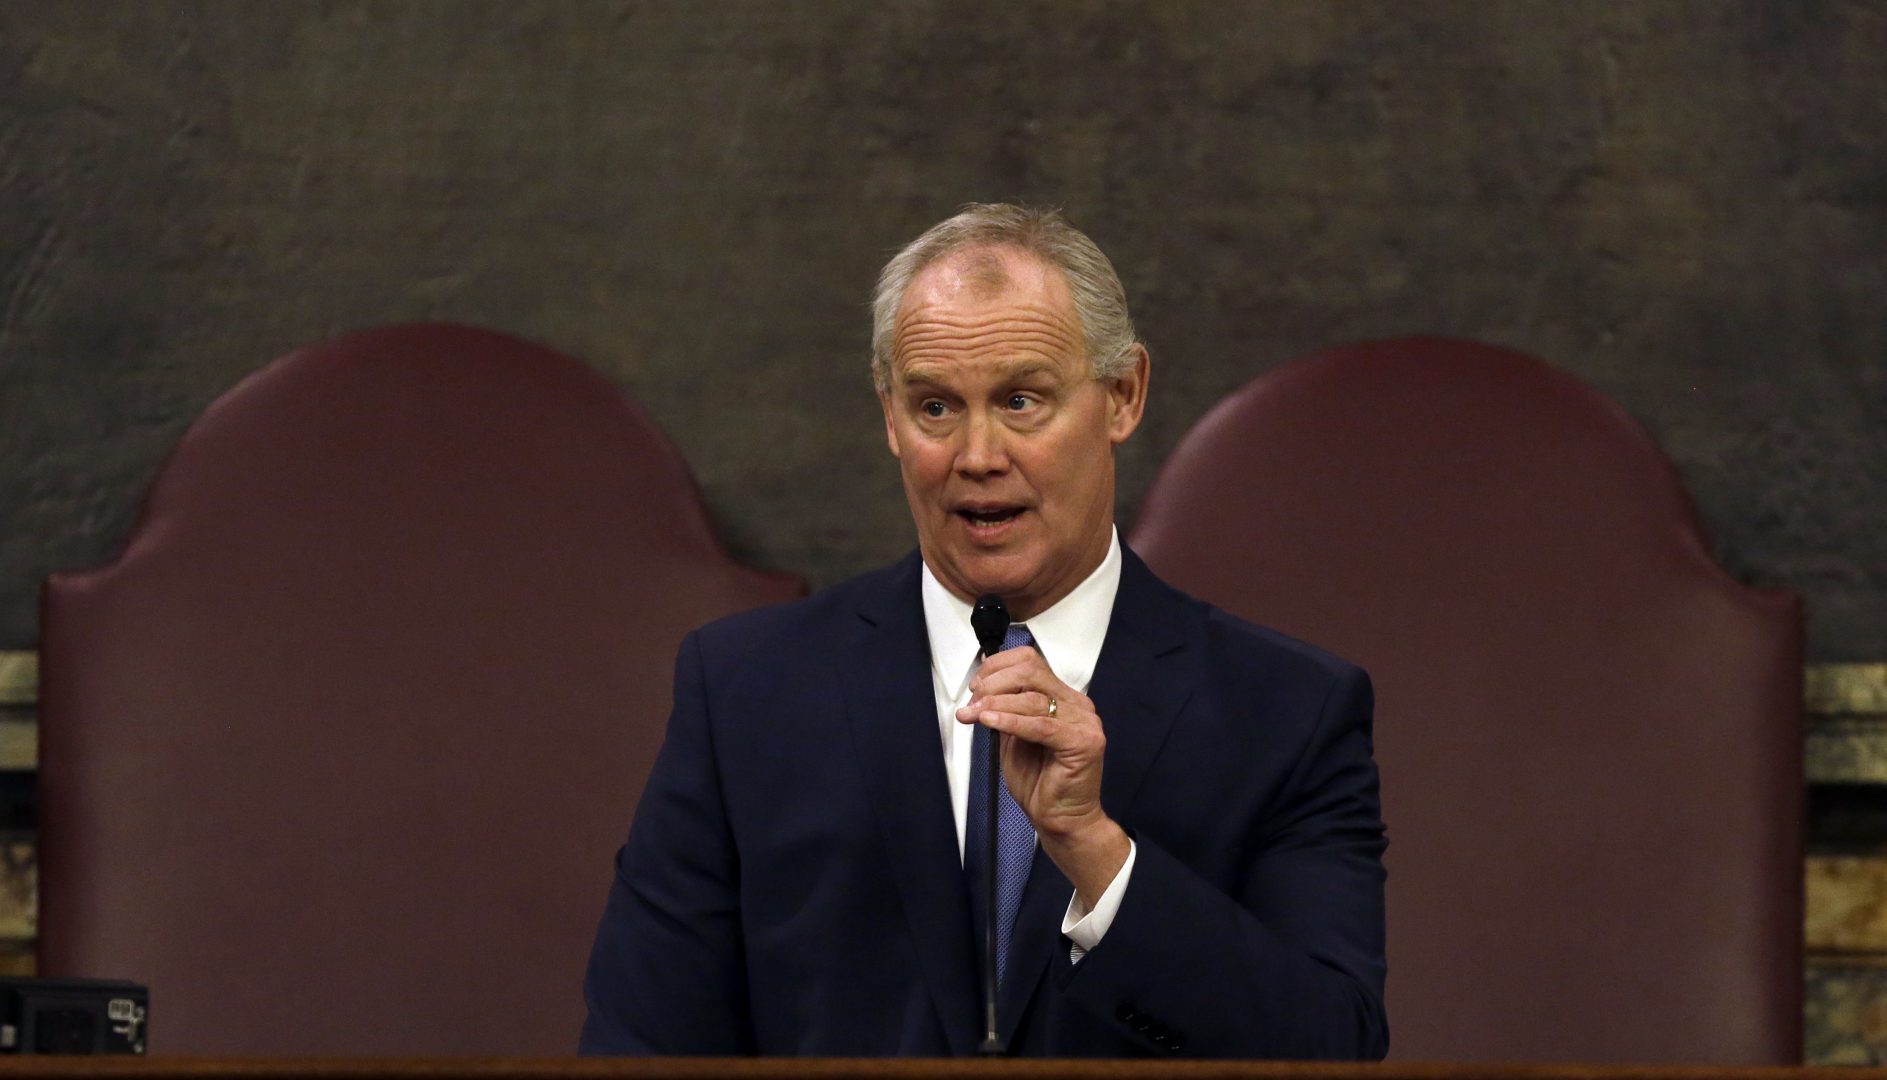 House Speaker Mike Turzai, R-Allegheny, addresses the House chamber after taking the oath of office Tuesday Jan. 1, 2019 in Harrisburg.